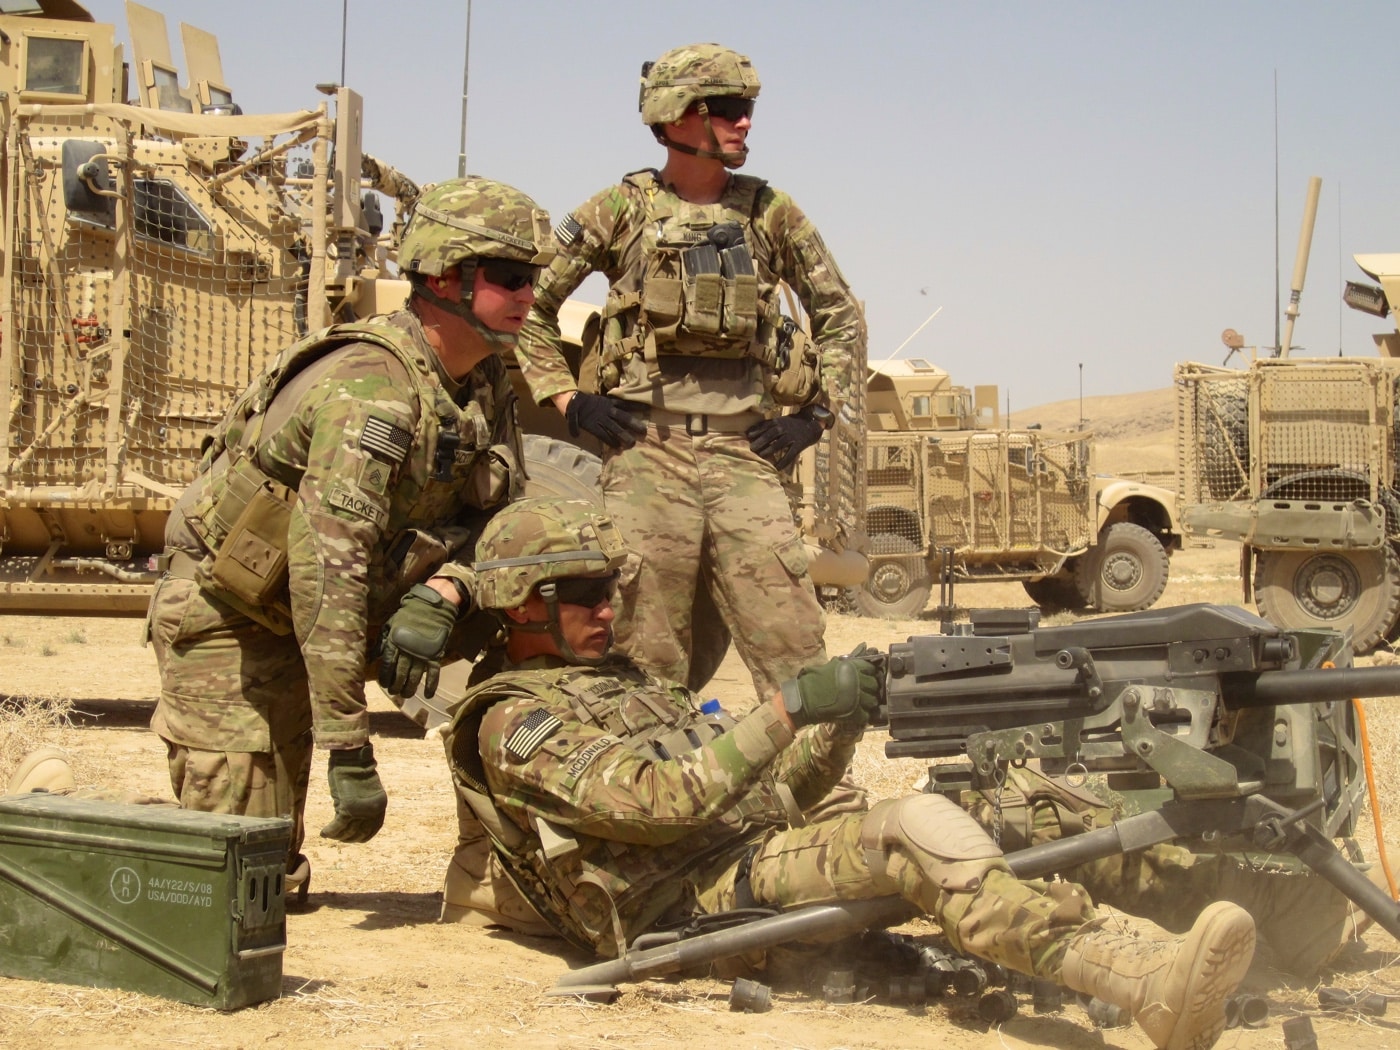 This photo shows US troops in training in Afghanistan. Outside his joint combat outpost in Baghlan province, Staff Sgt. Adam Tackett, the platoon sergeant for 1st platoon, Blackfoot Troop, 6th Squadron, 4th Cavalry Regiment, 3rd Brigade Combat Team, 1st Infantry Division trains Spc. McDonald on the MK19 grenade launcher. Sgt. Nicholas King, a section sergeant in 1st platoon watches the rounds impact downrange. The 6th Squadron, 4th Cavalry Regiment, 3rd Brigade Combat Team, 1st Infantry Division, from Fort Knox, Ky., in support of Operation Enduring Freedom.